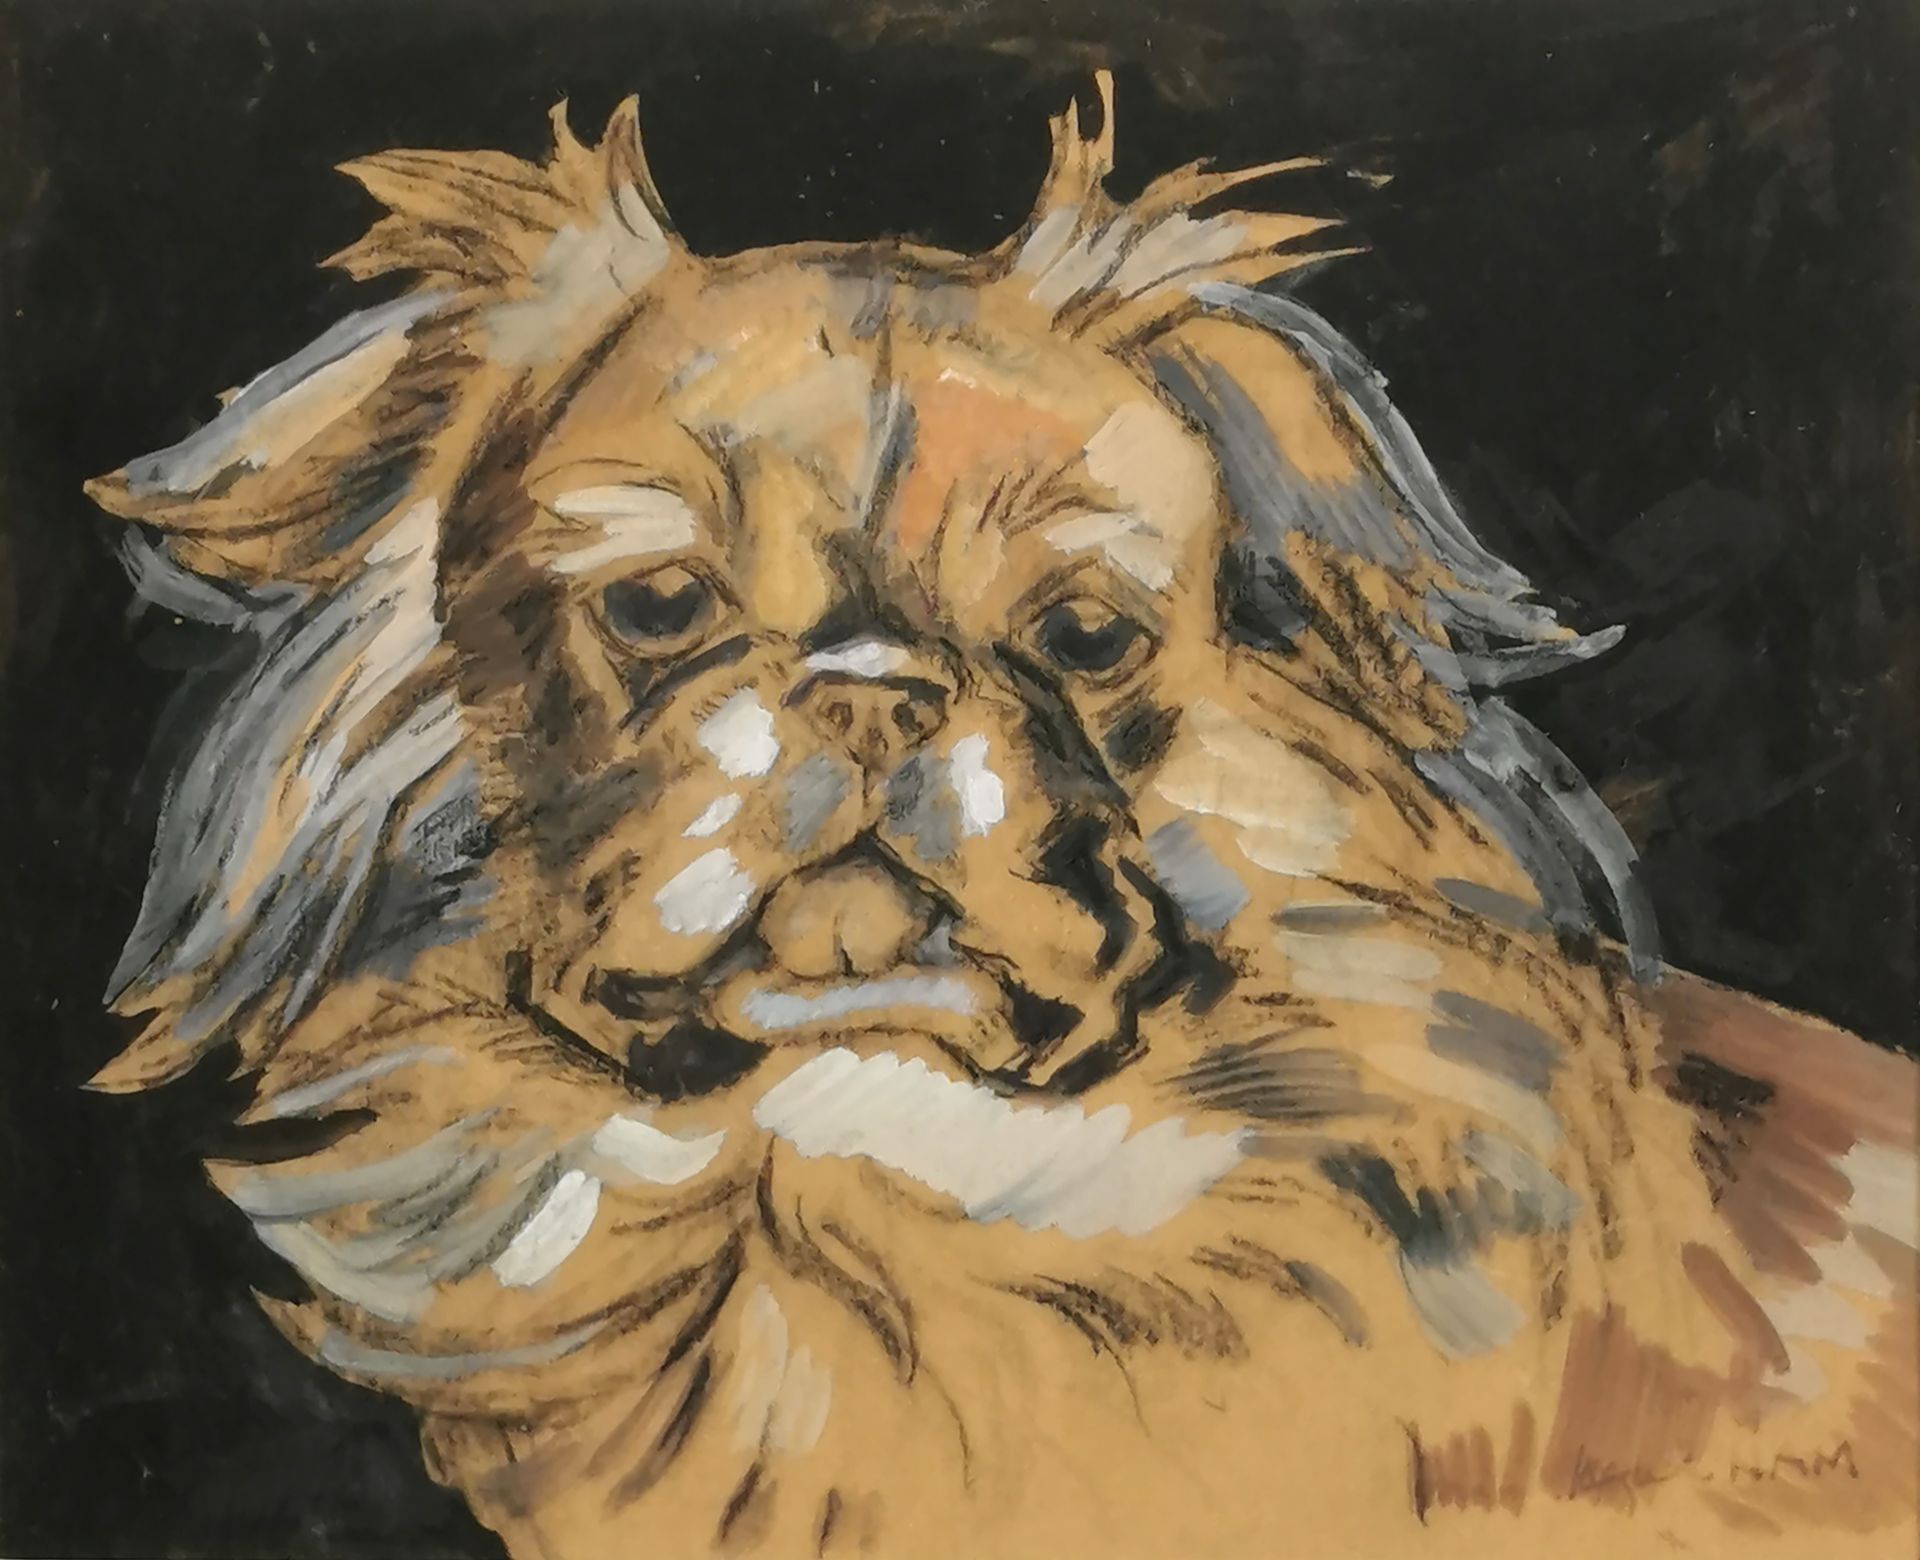 Null Jacques NAM, Jacques LEHMANN dit (1881-1974)

Study of a dog's head

Charco&hellip;